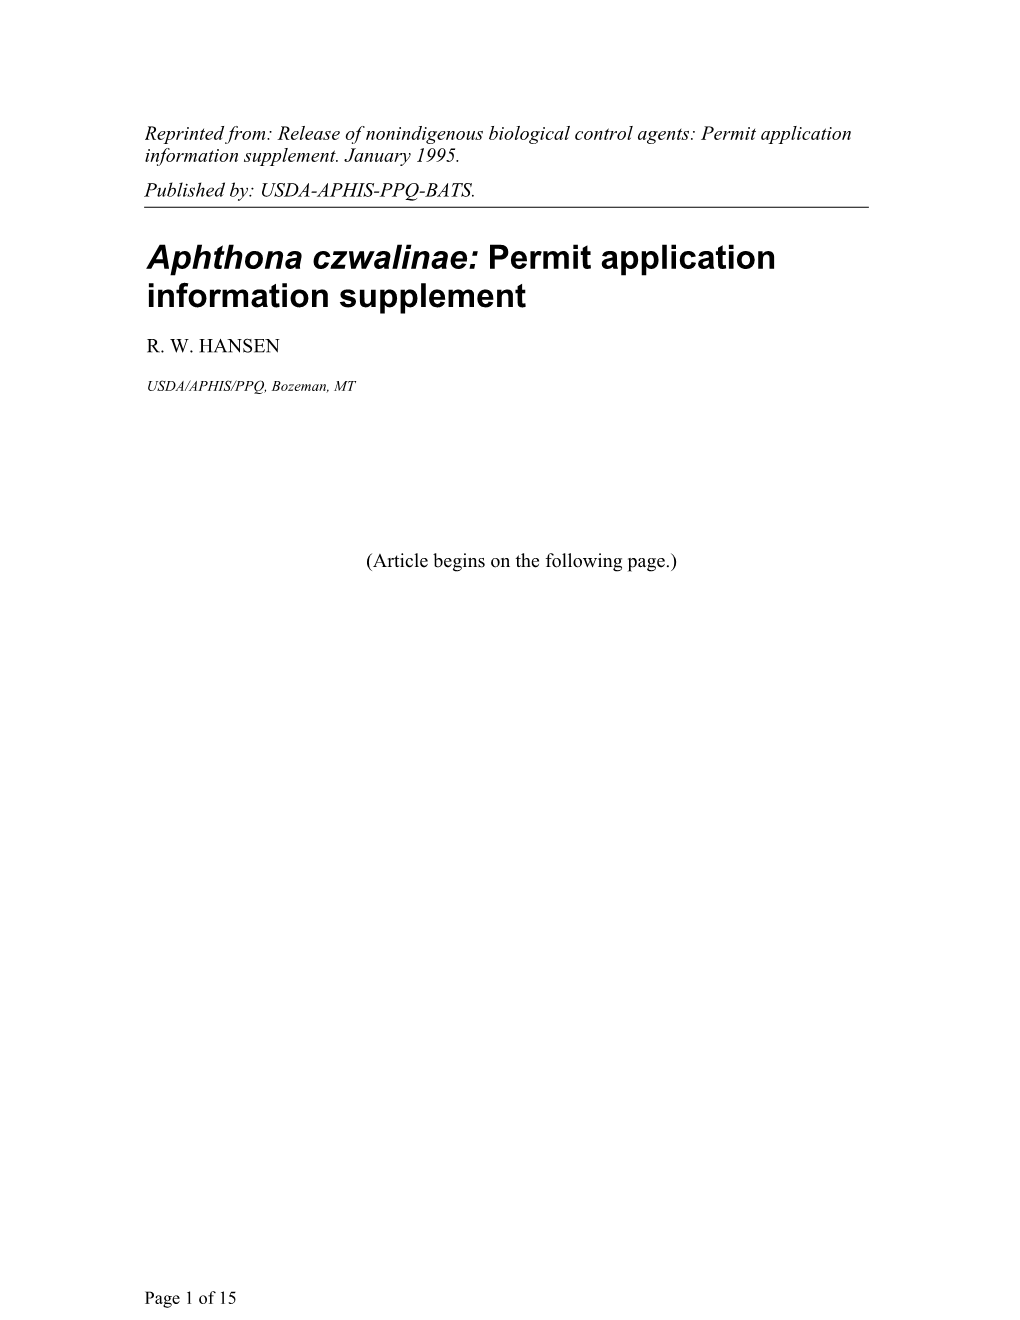 Aphthona Czwalinae: Permit Application Information Supplement